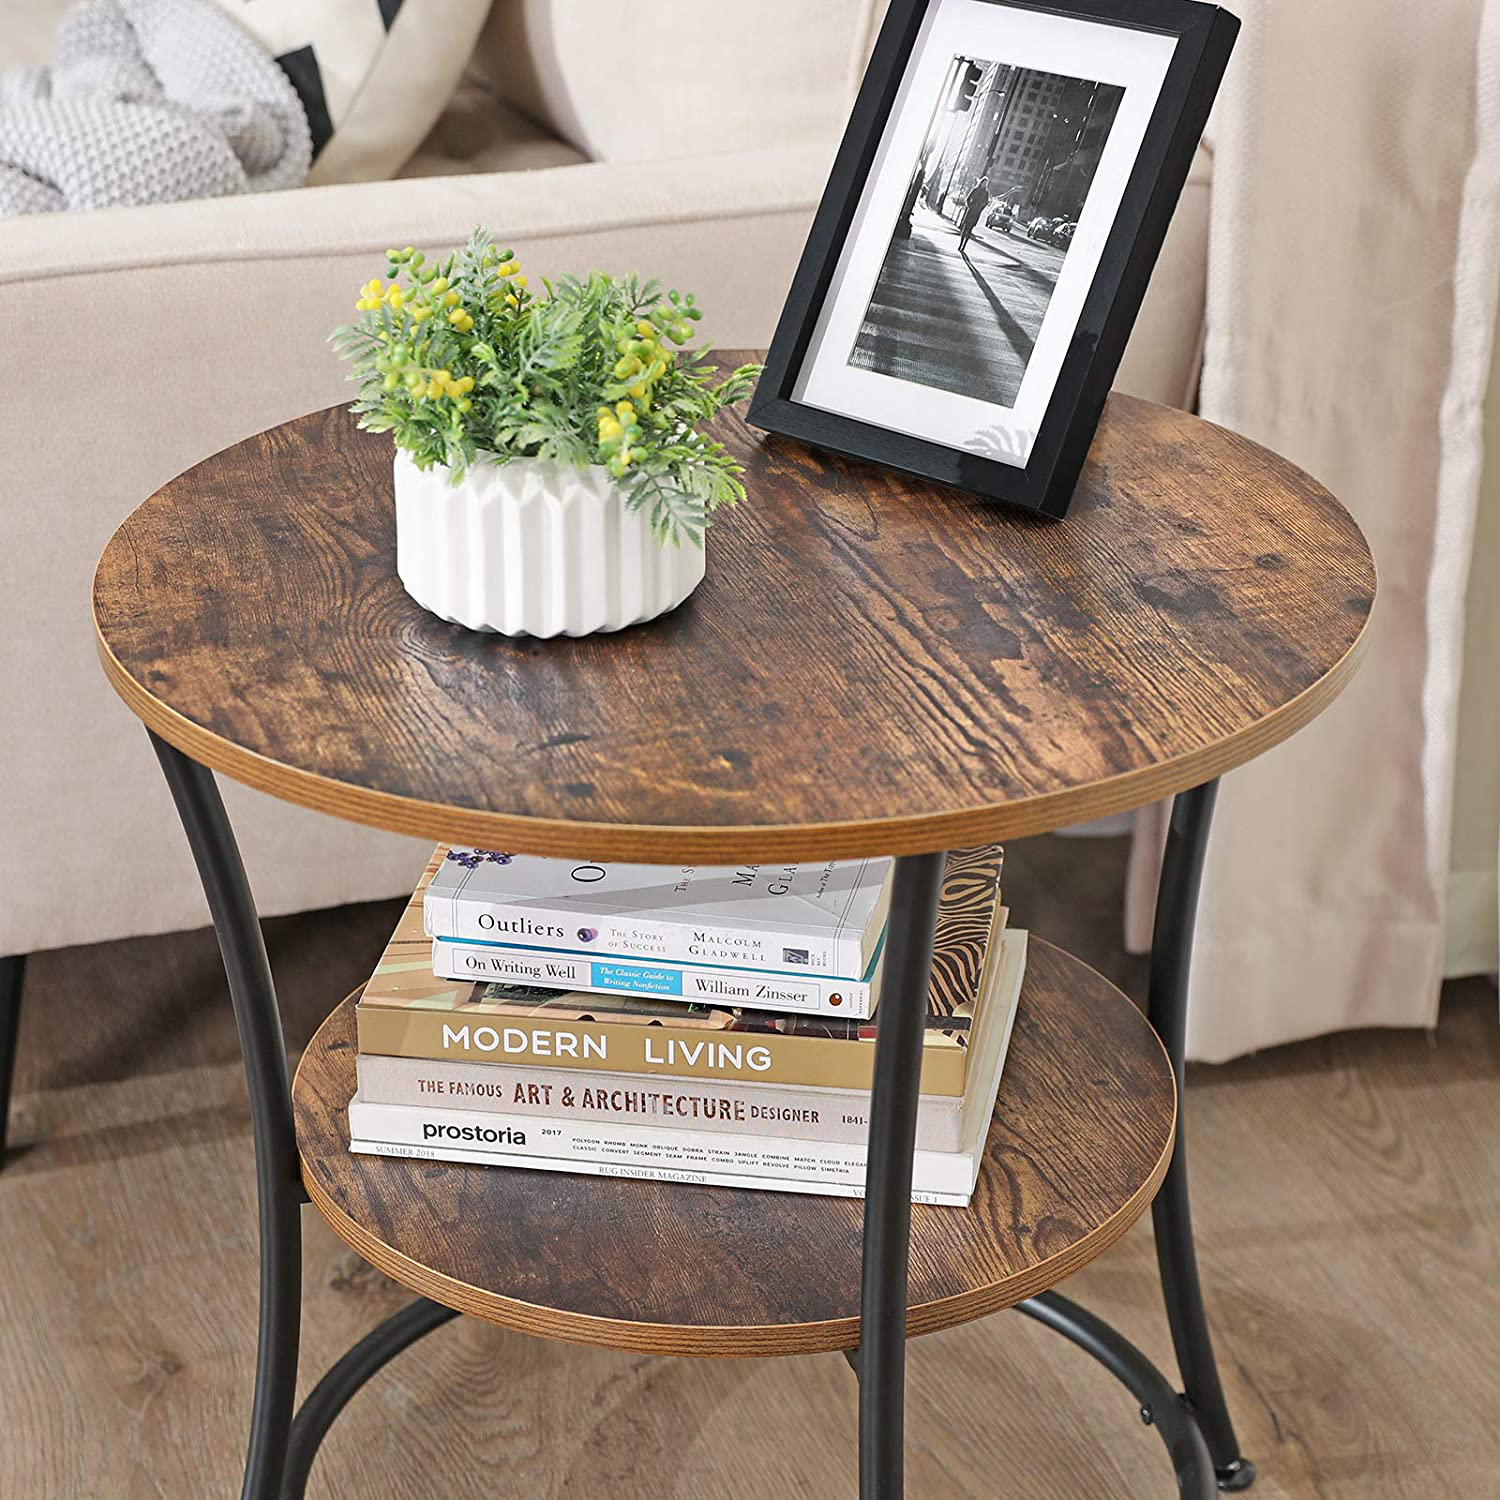 Rena Side Table Round, End Table with 2 Shelves,